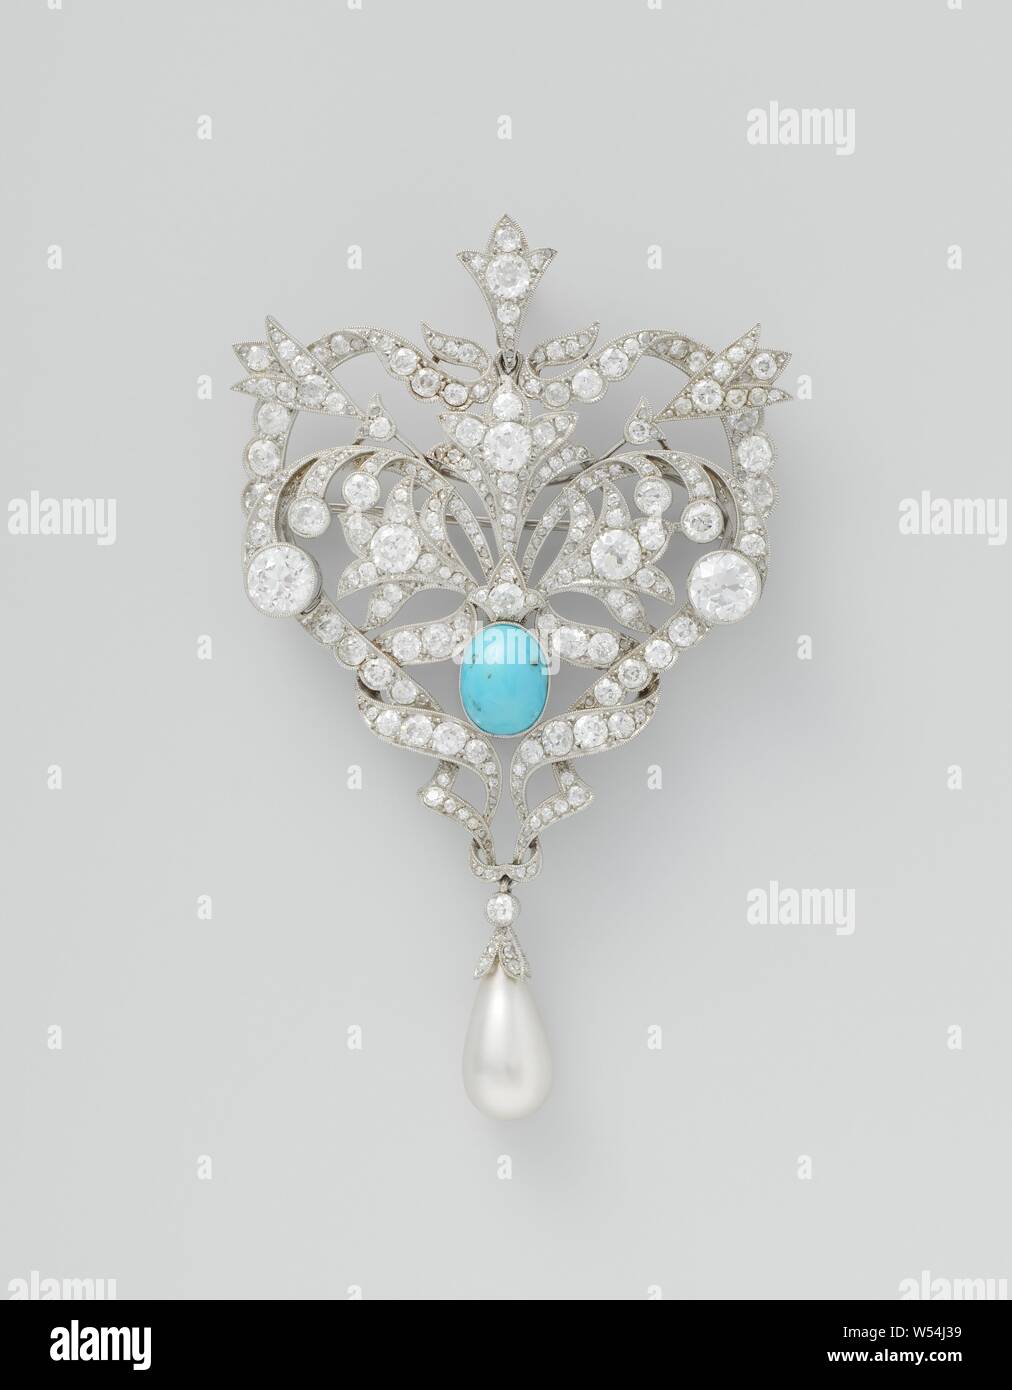 Large corsage, Large corsage or brooch of diamonds. Composed of tendrils and ribbons that form a heart with decoration. A turkois in the heart. At the bottom is a pearl., anonymous, France (possibly), c. 1880 - c. 1910, diamond (mineral), platinum (metal), turquoise (mineral), pearl, h 9.7 cm × w 6.0 cm Stock Photo